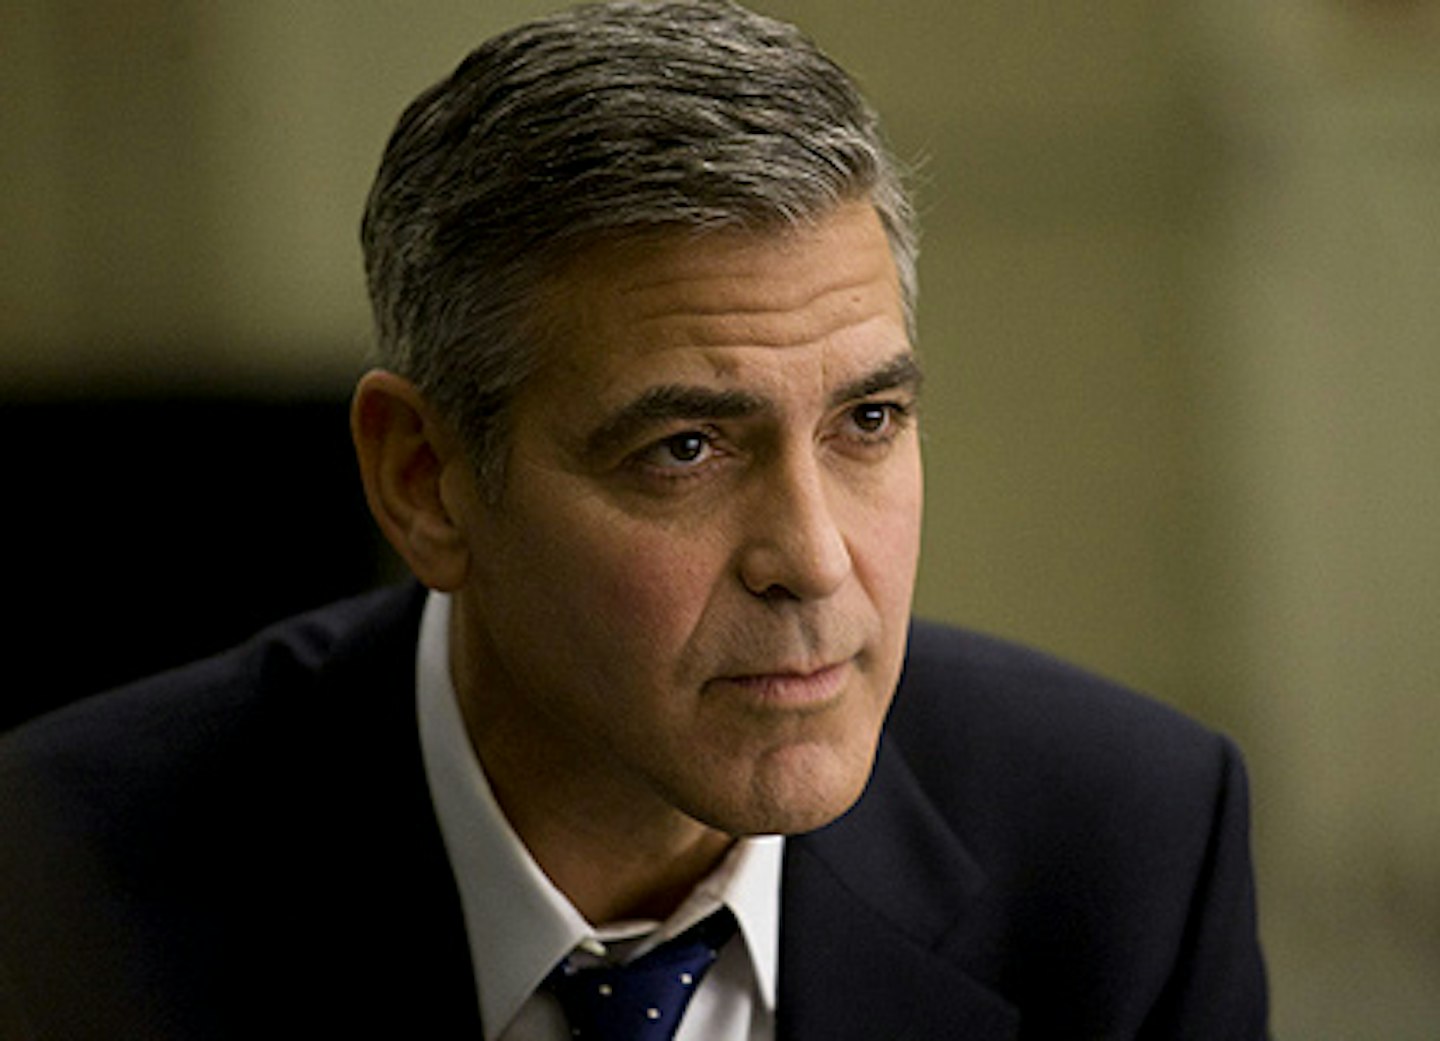 The Ides Of March - George Clooney